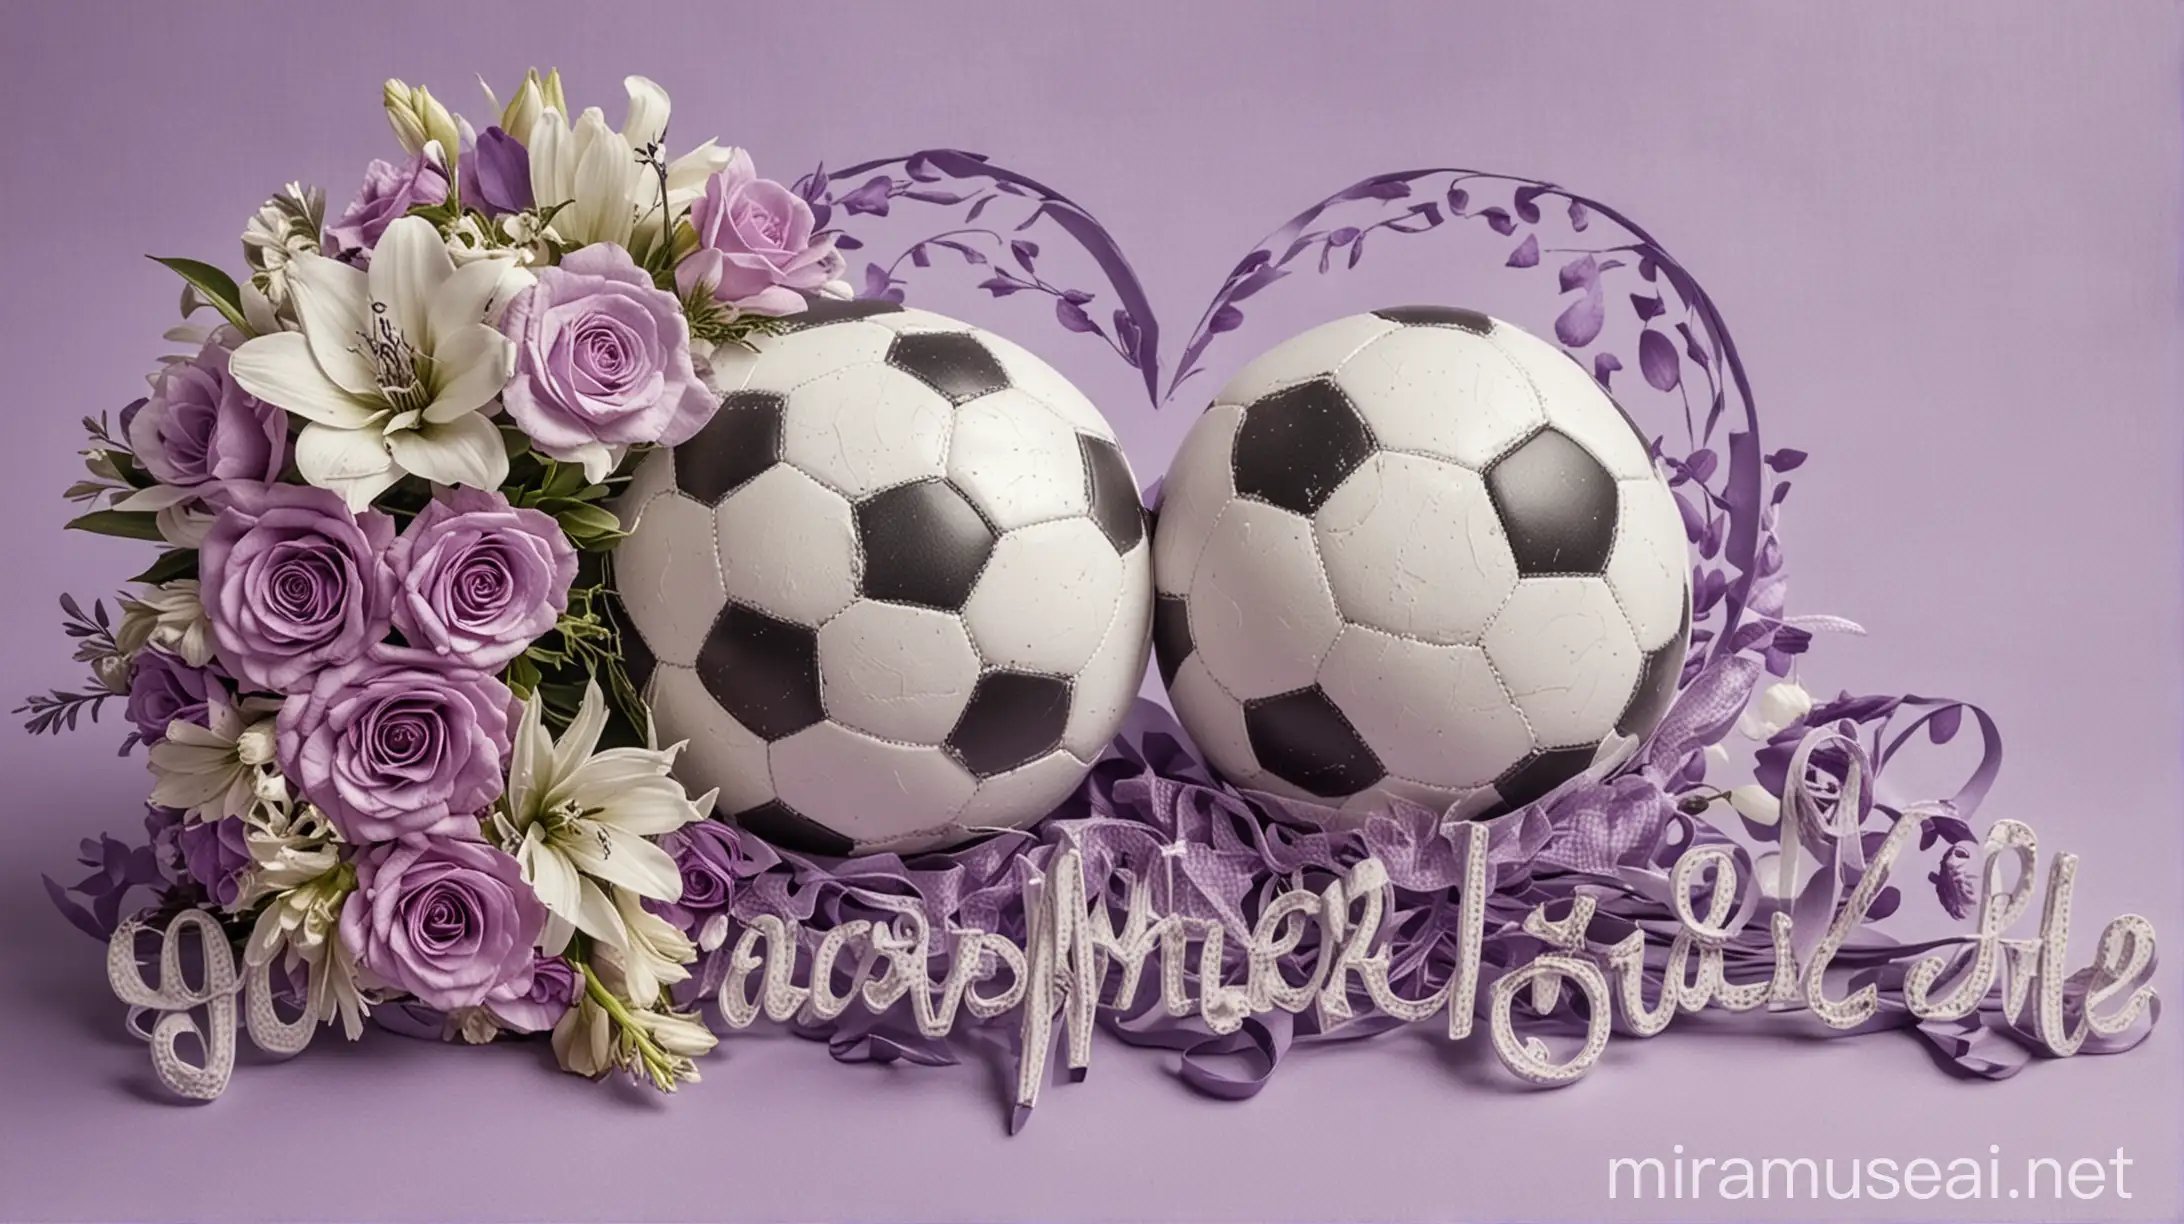 Romantic Soccer Wedding Greeting Card for Ricsi and Anett